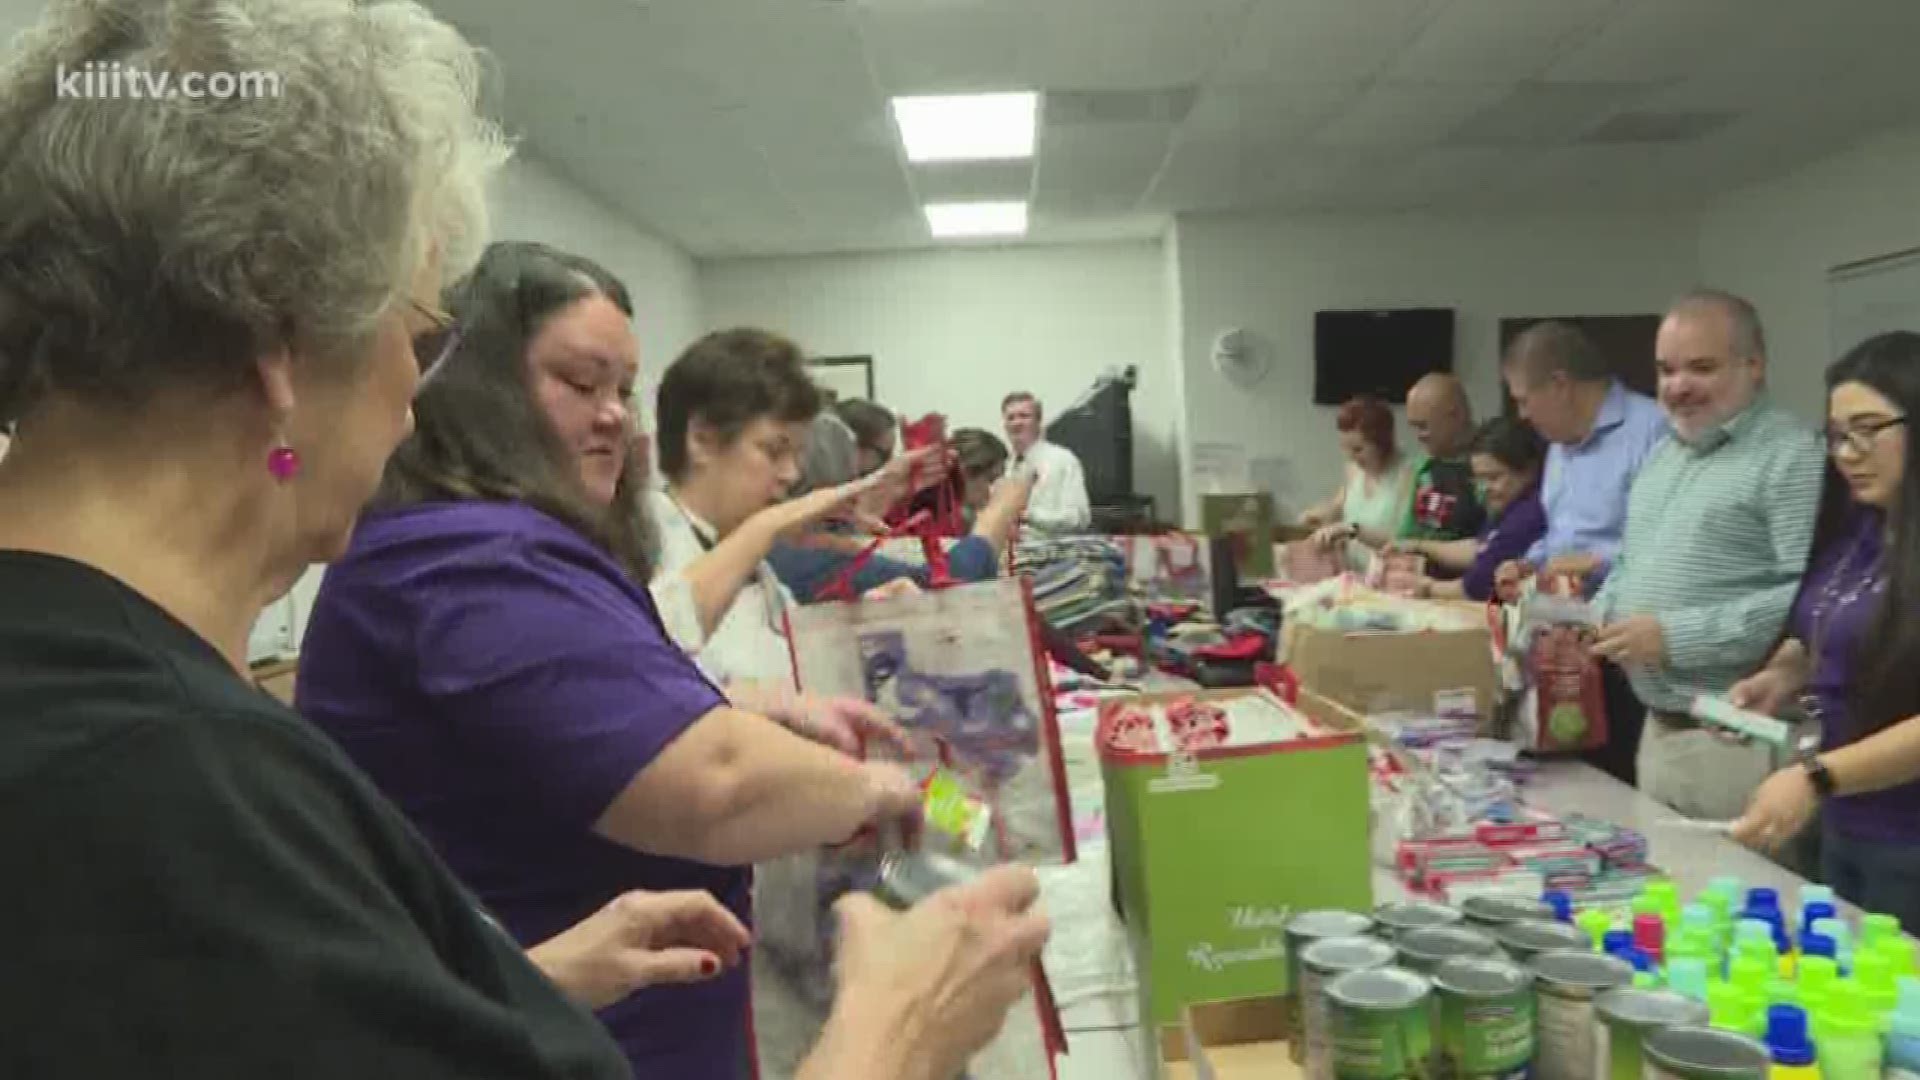 Silver Advocates Partners is looking out for South Texas' elderly. The nonprofit is behind the holiday care packages that show up under their trees for the holidays.